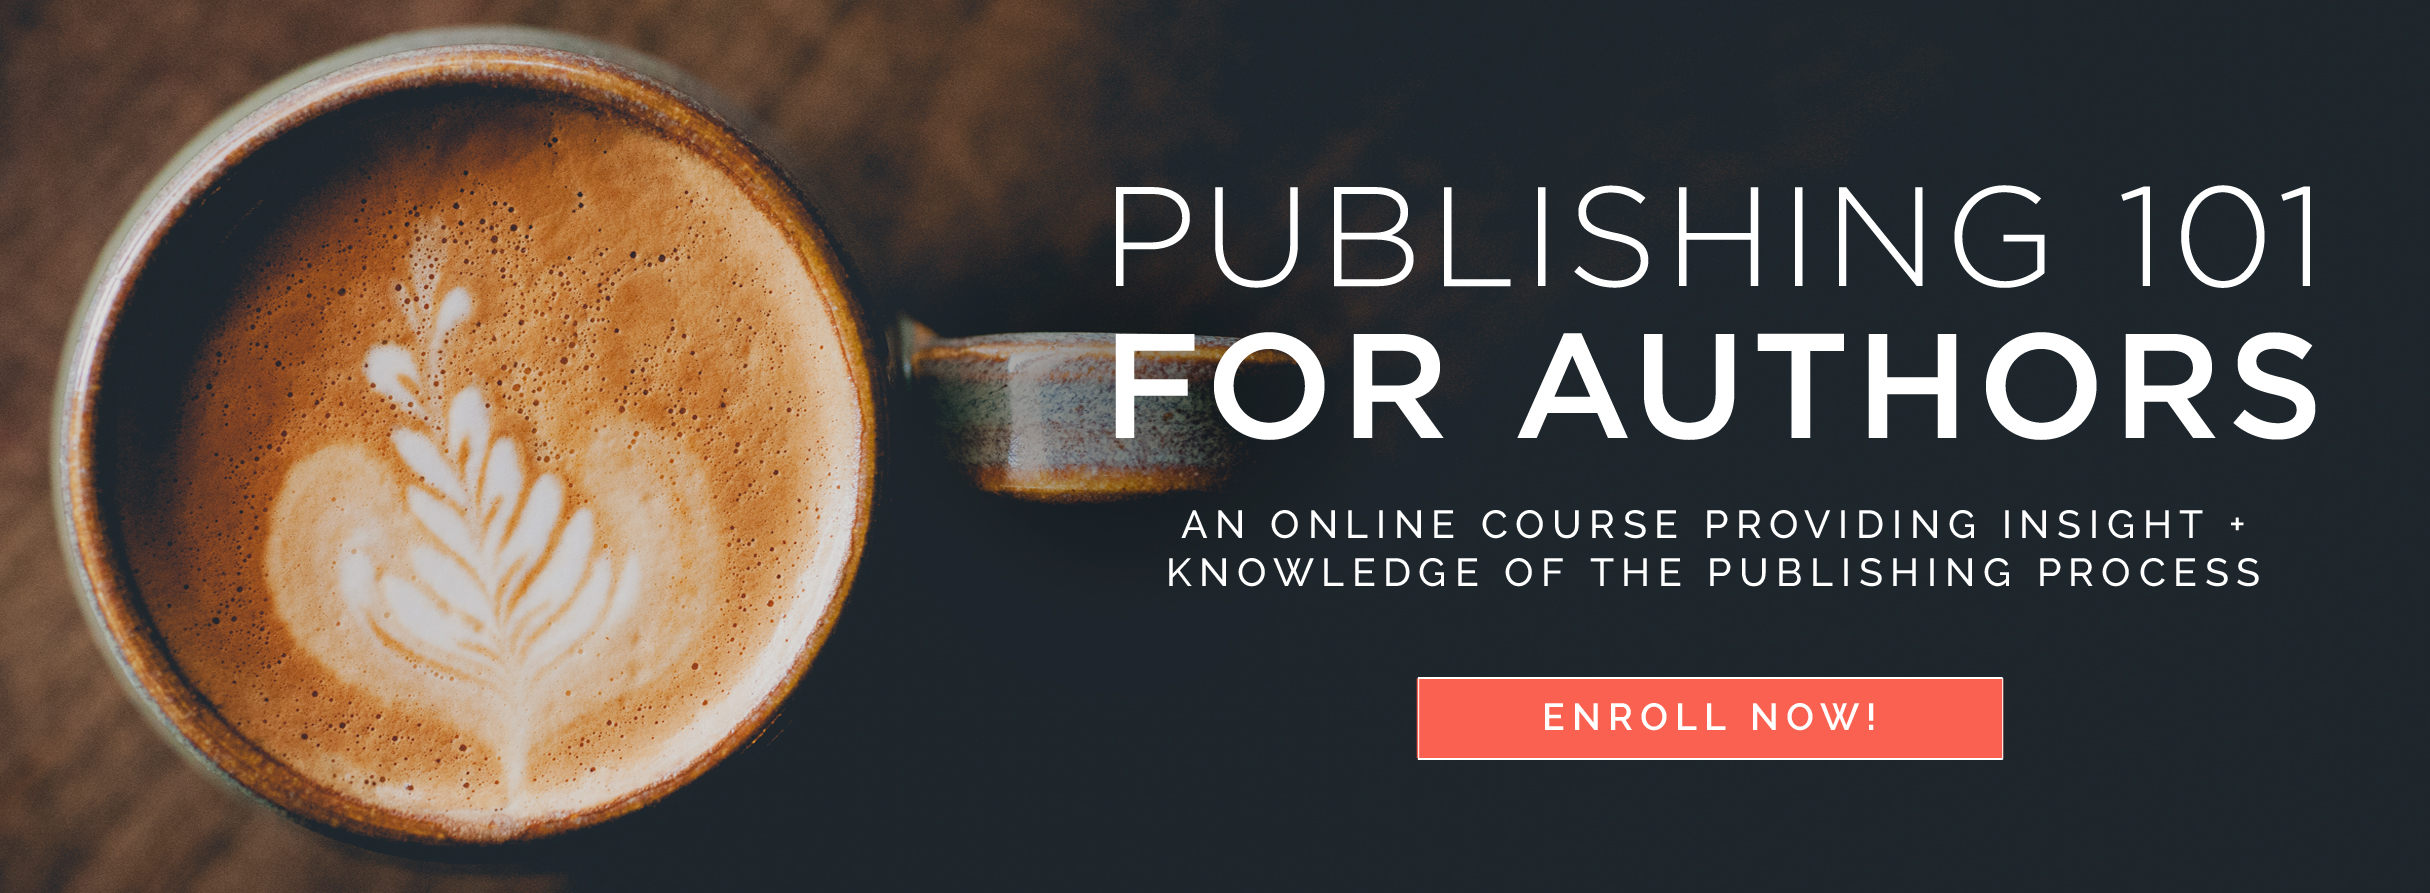 An Online Course providing insite + Knowledge of the Publishing ProcesS